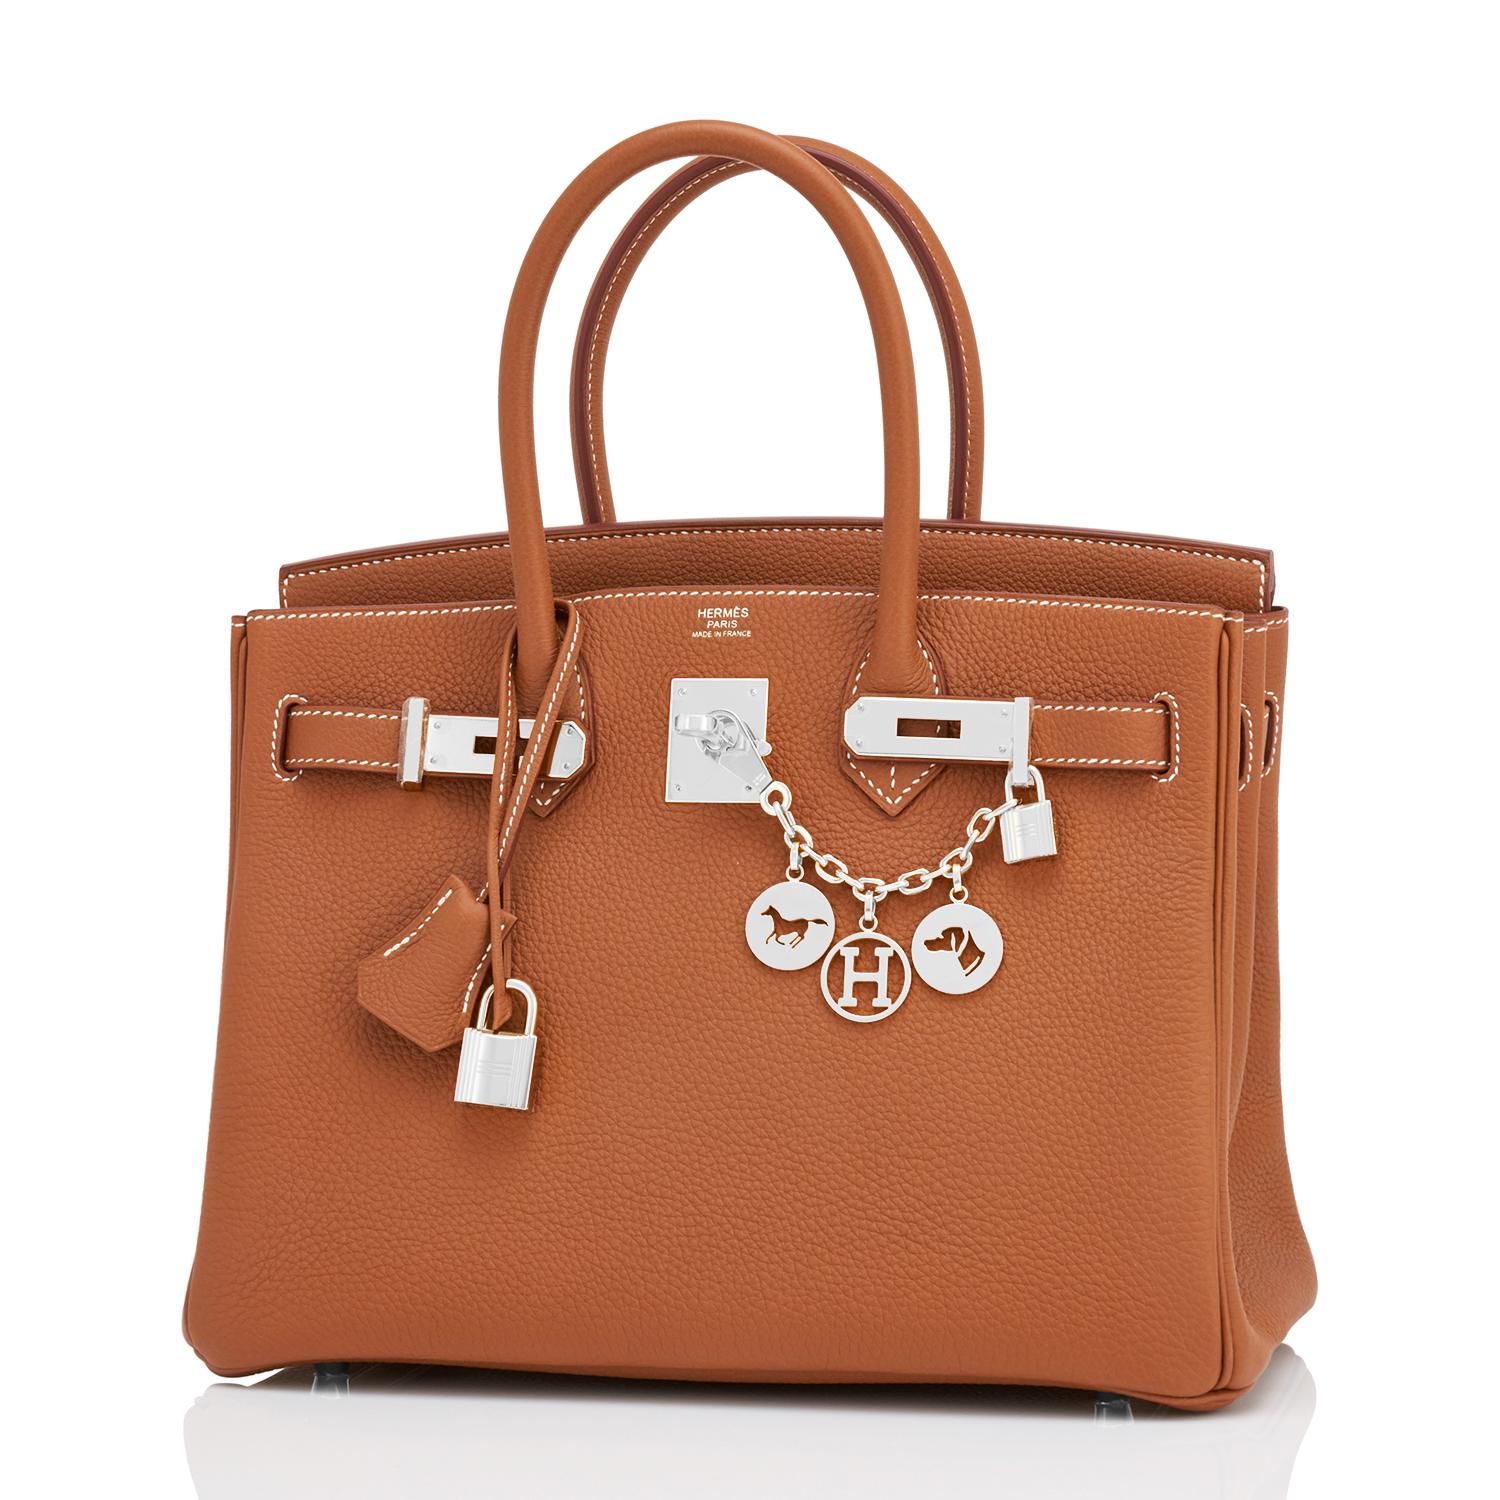 Hermes Birkin 30cm Gold Tan Togo Palladium Bag Z Stamp, 2021
Just purchased from Hermes store- bag bears new 2021 interior Z Stamp!
Brand New in Box. Store Fresh. Pristine Condition (with plastic on hardware). 
Perfect gift! Comes with lock, keys,